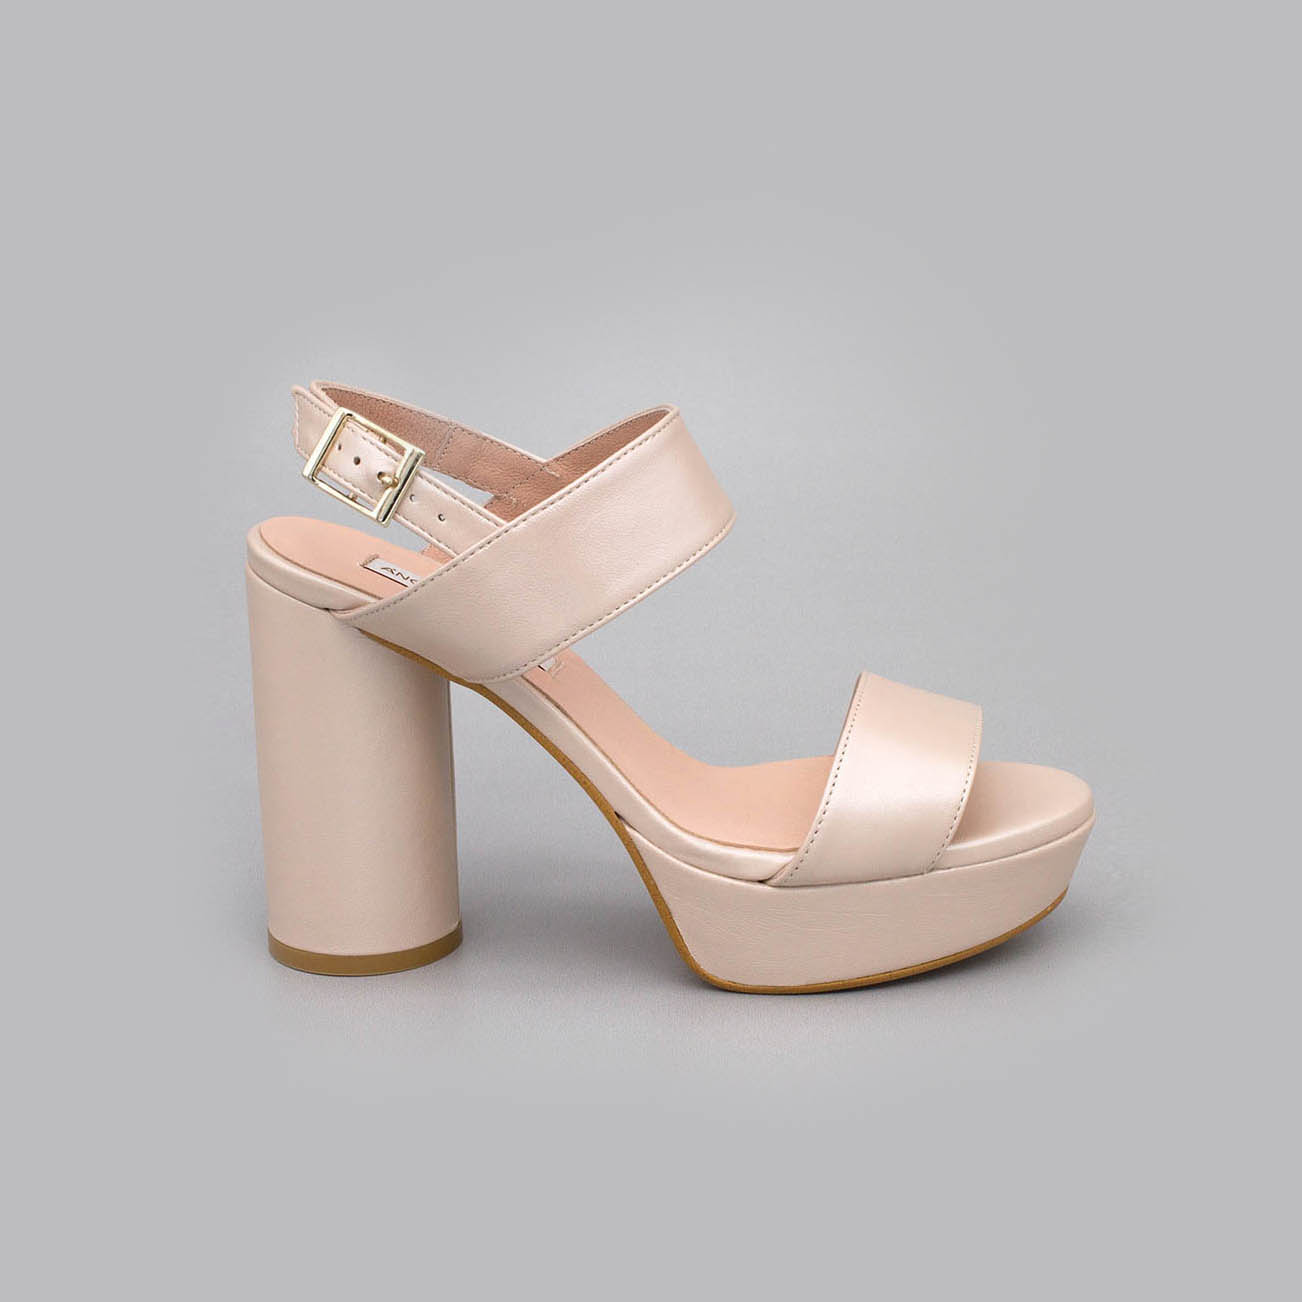 sandal leather Angel Alarcon bride spring summer 2020 2021 woman subject ankle round platform heel shoe color nude